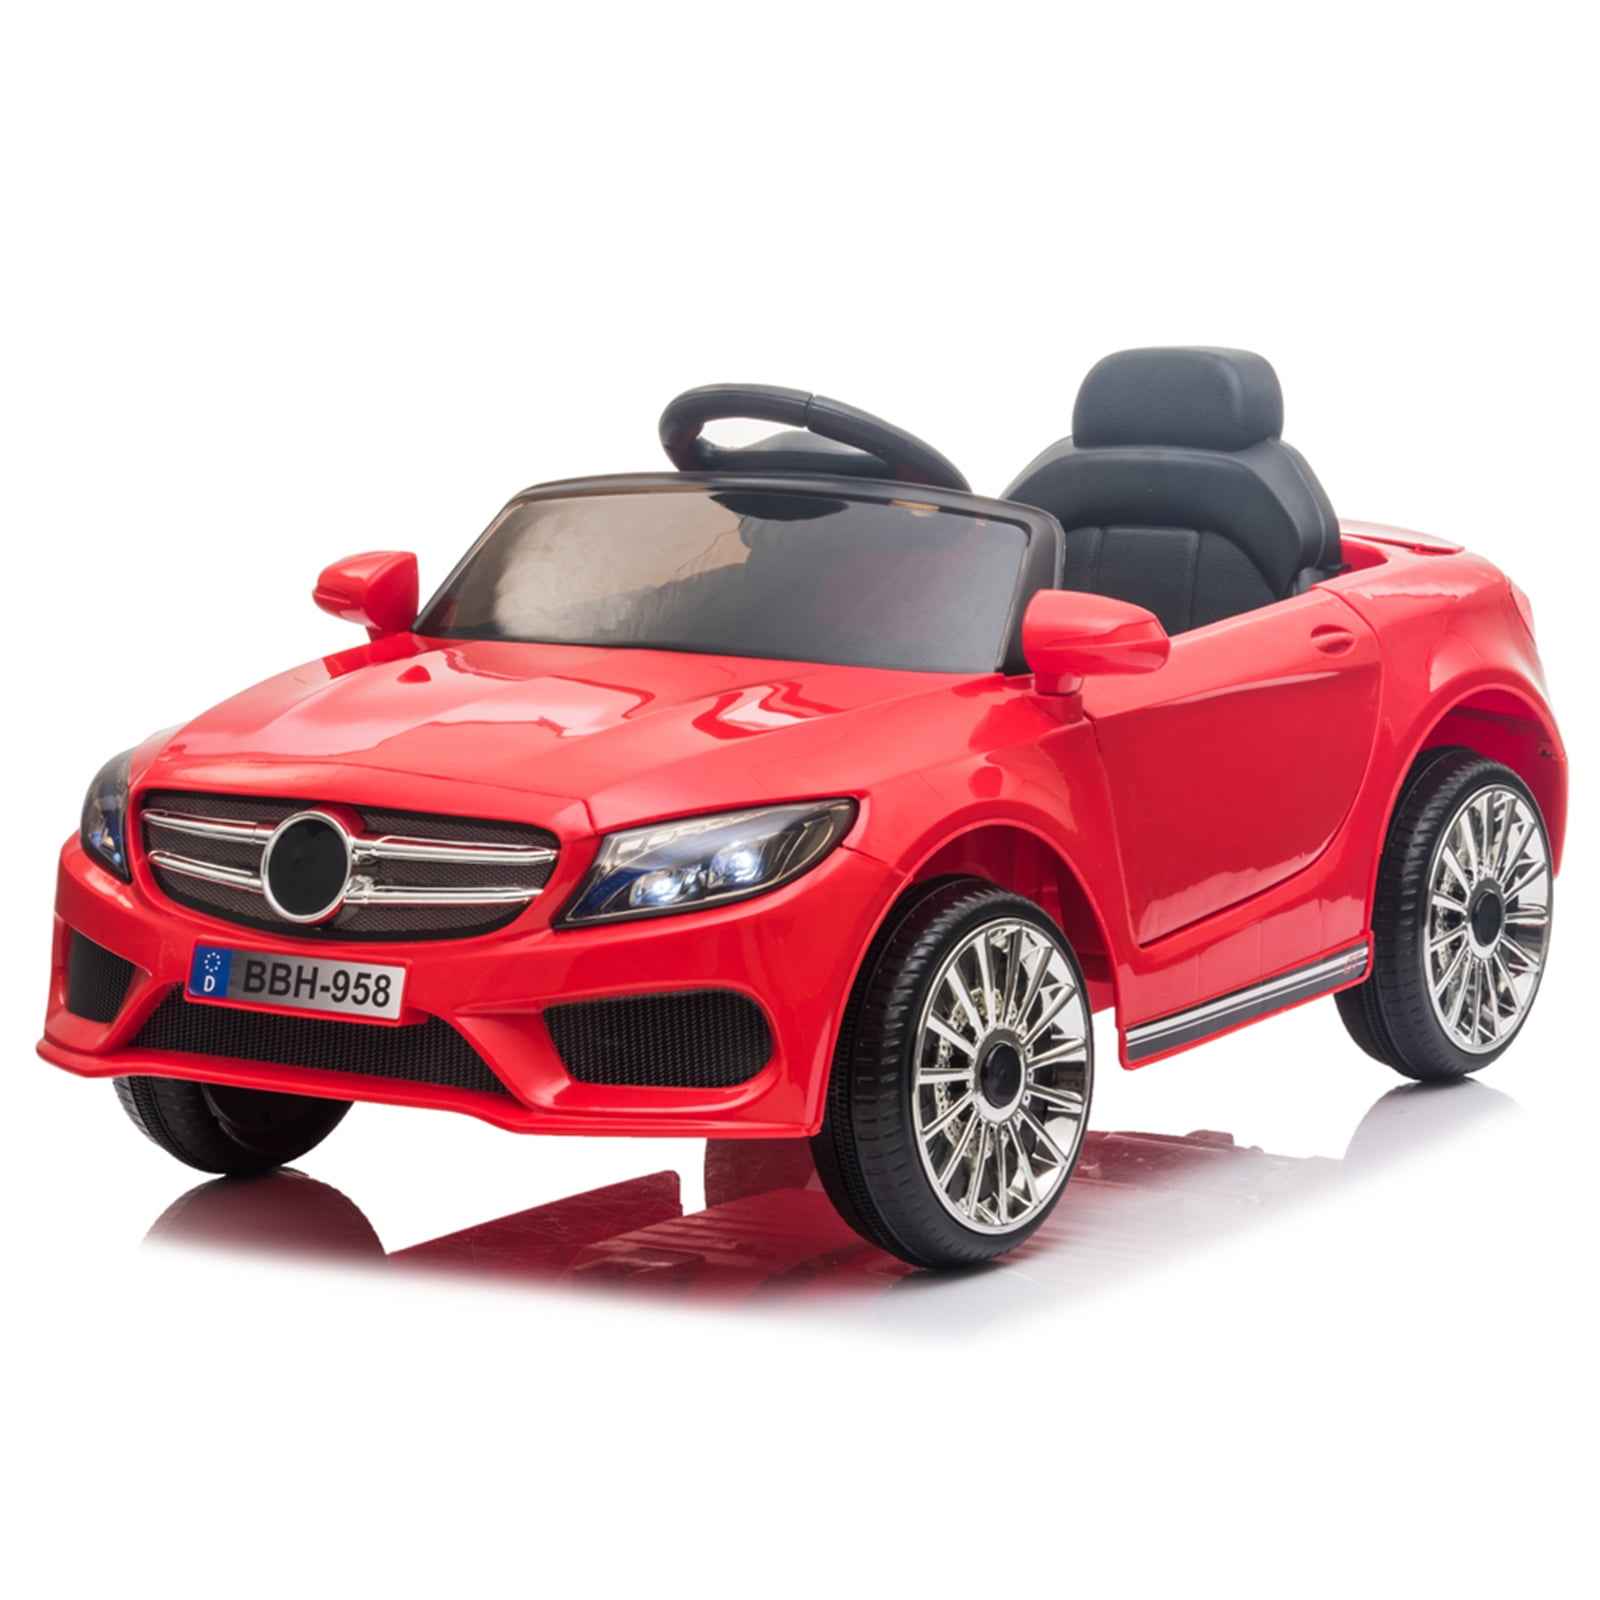 Details about   45in Large Kids Ride on Car Truck Toy 12V Electric Vehicle for Kids under 110lbs 